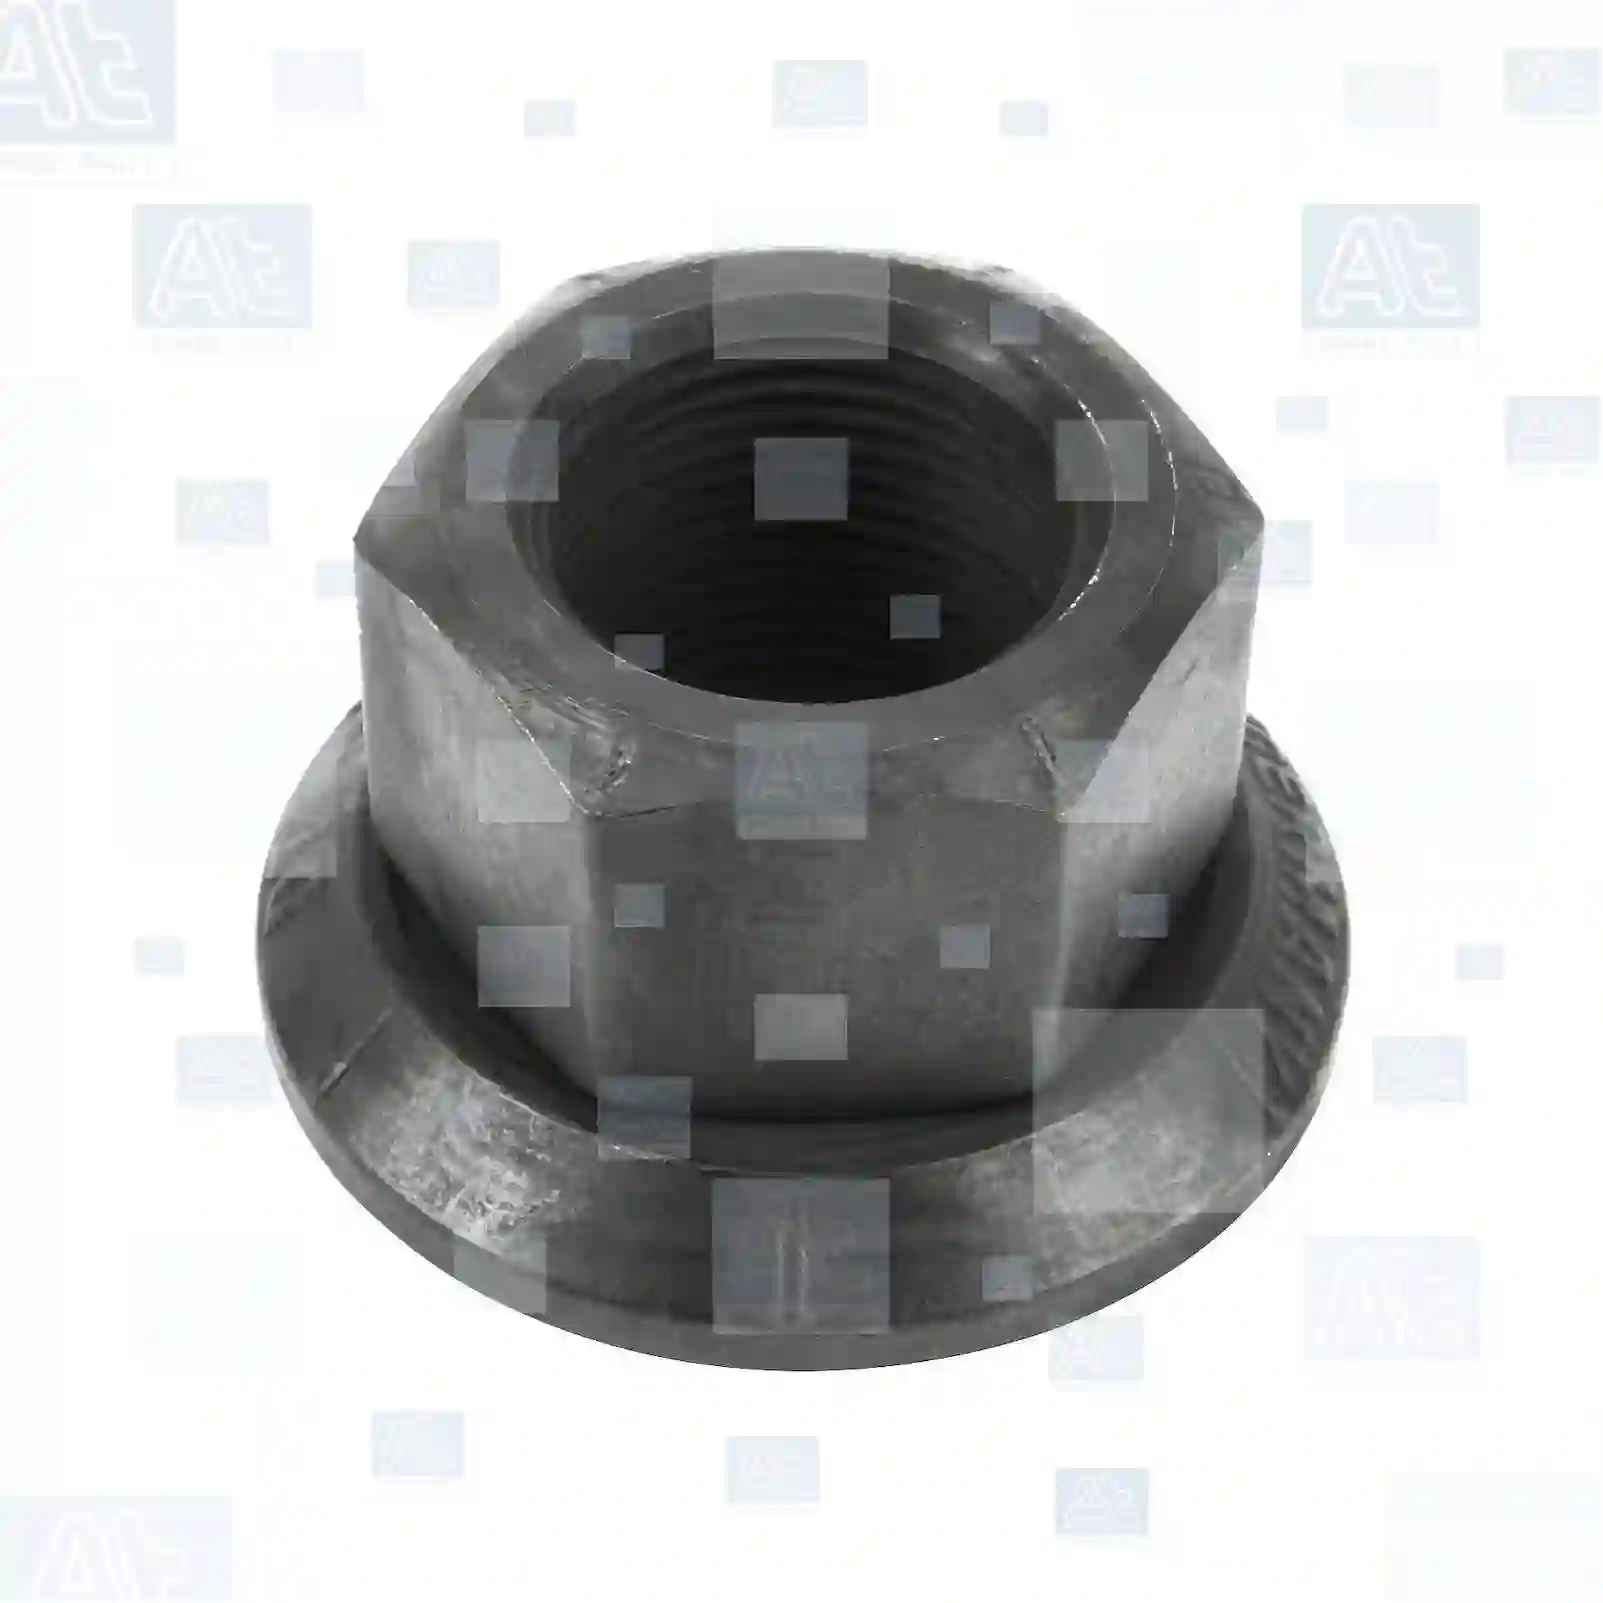 Wheel nut, surface: phosphated, at no 77726167, oem no: 0252192210, 0252192310, 0620652, 0652575, 1241815, 1356737, 1358990, 1402360, 1455046, 1826088, 620652, 652575, 04459603, 41031725, 41036367, 04459603, 41031725, 42117503, 4459603, 81440500123, 81455030001, 81455030026, 81455030049, 81455030056, 3454007024, 3454007124, 3854000124, 6174000024, 21203099, 21218643, 4247301200, 0374361151, 6374361151, 8241999726, 947972, 2V5601295, ZG41978-0008 At Spare Part | Engine, Accelerator Pedal, Camshaft, Connecting Rod, Crankcase, Crankshaft, Cylinder Head, Engine Suspension Mountings, Exhaust Manifold, Exhaust Gas Recirculation, Filter Kits, Flywheel Housing, General Overhaul Kits, Engine, Intake Manifold, Oil Cleaner, Oil Cooler, Oil Filter, Oil Pump, Oil Sump, Piston & Liner, Sensor & Switch, Timing Case, Turbocharger, Cooling System, Belt Tensioner, Coolant Filter, Coolant Pipe, Corrosion Prevention Agent, Drive, Expansion Tank, Fan, Intercooler, Monitors & Gauges, Radiator, Thermostat, V-Belt / Timing belt, Water Pump, Fuel System, Electronical Injector Unit, Feed Pump, Fuel Filter, cpl., Fuel Gauge Sender,  Fuel Line, Fuel Pump, Fuel Tank, Injection Line Kit, Injection Pump, Exhaust System, Clutch & Pedal, Gearbox, Propeller Shaft, Axles, Brake System, Hubs & Wheels, Suspension, Leaf Spring, Universal Parts / Accessories, Steering, Electrical System, Cabin Wheel nut, surface: phosphated, at no 77726167, oem no: 0252192210, 0252192310, 0620652, 0652575, 1241815, 1356737, 1358990, 1402360, 1455046, 1826088, 620652, 652575, 04459603, 41031725, 41036367, 04459603, 41031725, 42117503, 4459603, 81440500123, 81455030001, 81455030026, 81455030049, 81455030056, 3454007024, 3454007124, 3854000124, 6174000024, 21203099, 21218643, 4247301200, 0374361151, 6374361151, 8241999726, 947972, 2V5601295, ZG41978-0008 At Spare Part | Engine, Accelerator Pedal, Camshaft, Connecting Rod, Crankcase, Crankshaft, Cylinder Head, Engine Suspension Mountings, Exhaust Manifold, Exhaust Gas Recirculation, Filter Kits, Flywheel Housing, General Overhaul Kits, Engine, Intake Manifold, Oil Cleaner, Oil Cooler, Oil Filter, Oil Pump, Oil Sump, Piston & Liner, Sensor & Switch, Timing Case, Turbocharger, Cooling System, Belt Tensioner, Coolant Filter, Coolant Pipe, Corrosion Prevention Agent, Drive, Expansion Tank, Fan, Intercooler, Monitors & Gauges, Radiator, Thermostat, V-Belt / Timing belt, Water Pump, Fuel System, Electronical Injector Unit, Feed Pump, Fuel Filter, cpl., Fuel Gauge Sender,  Fuel Line, Fuel Pump, Fuel Tank, Injection Line Kit, Injection Pump, Exhaust System, Clutch & Pedal, Gearbox, Propeller Shaft, Axles, Brake System, Hubs & Wheels, Suspension, Leaf Spring, Universal Parts / Accessories, Steering, Electrical System, Cabin